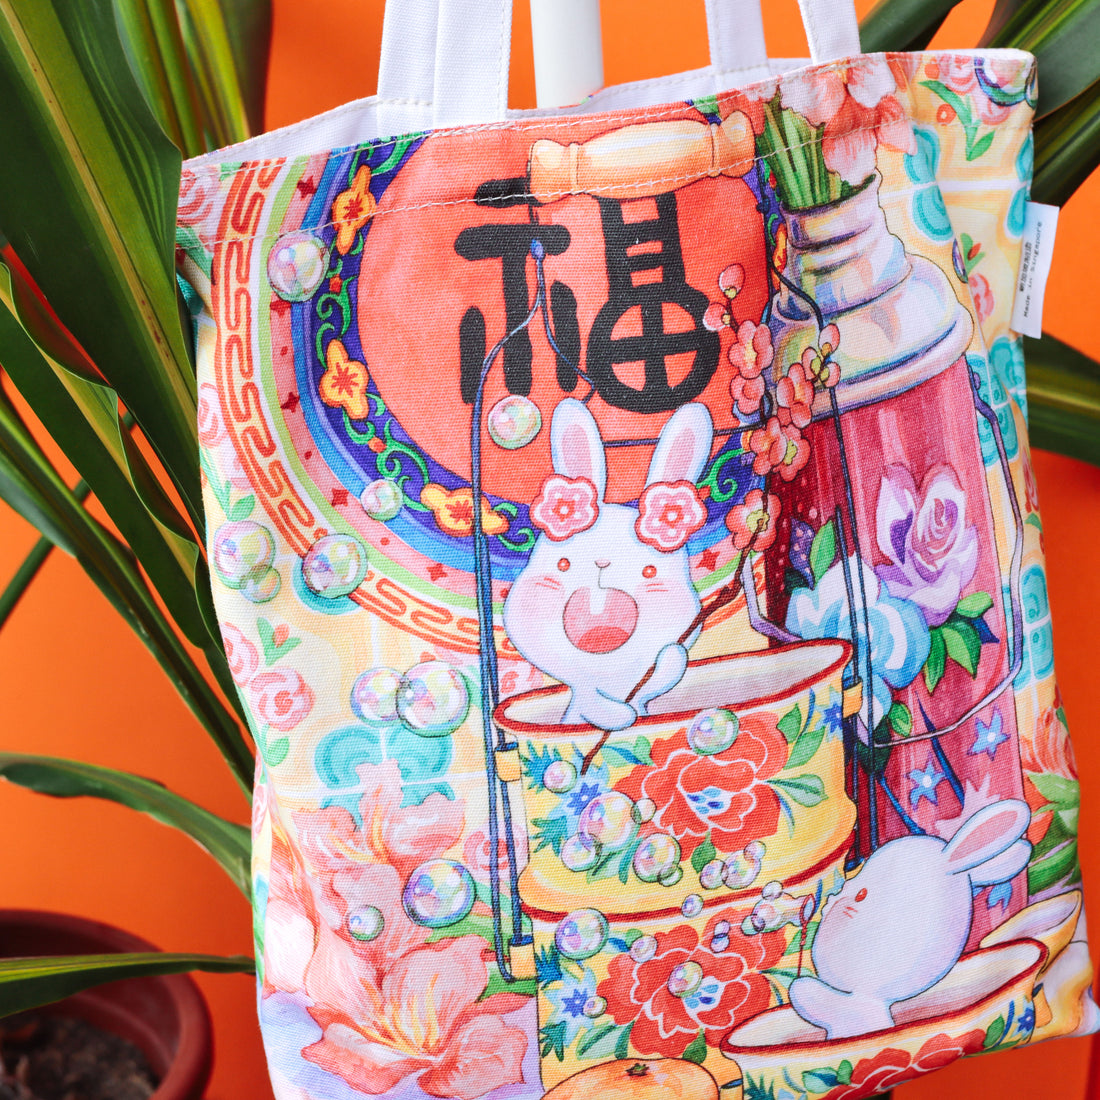 Bunny-ful Year | Tote Bag CNY 2023